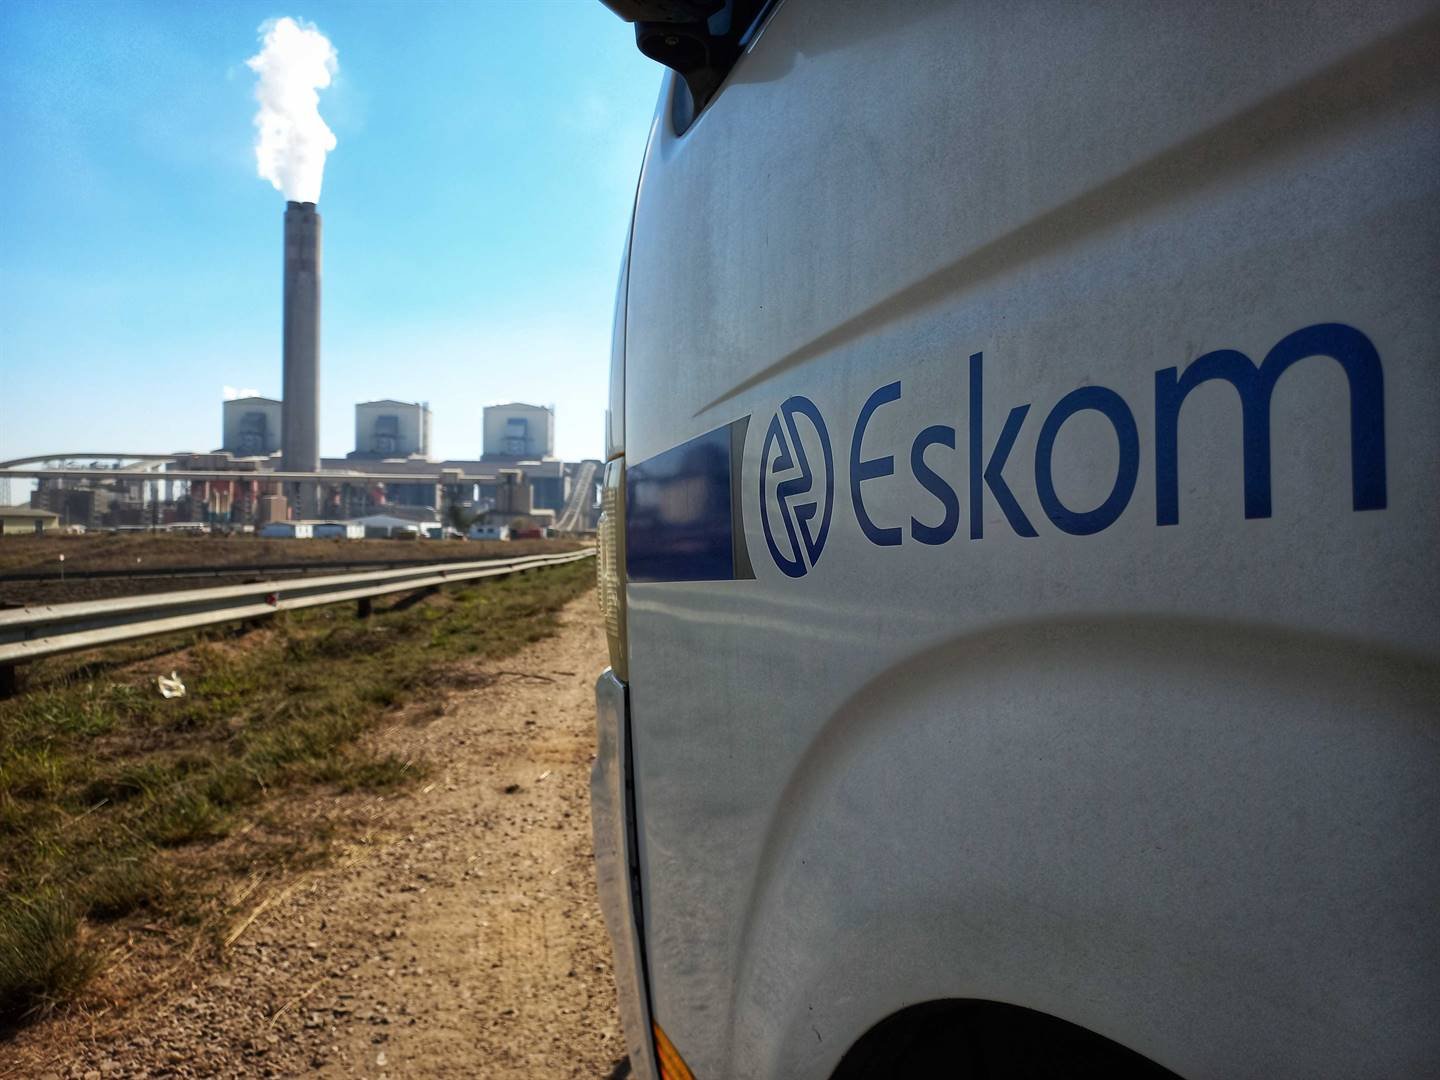 Eskom experienced a loss of a significant cluster of units from various power stations nationwide. Photo by William Horne